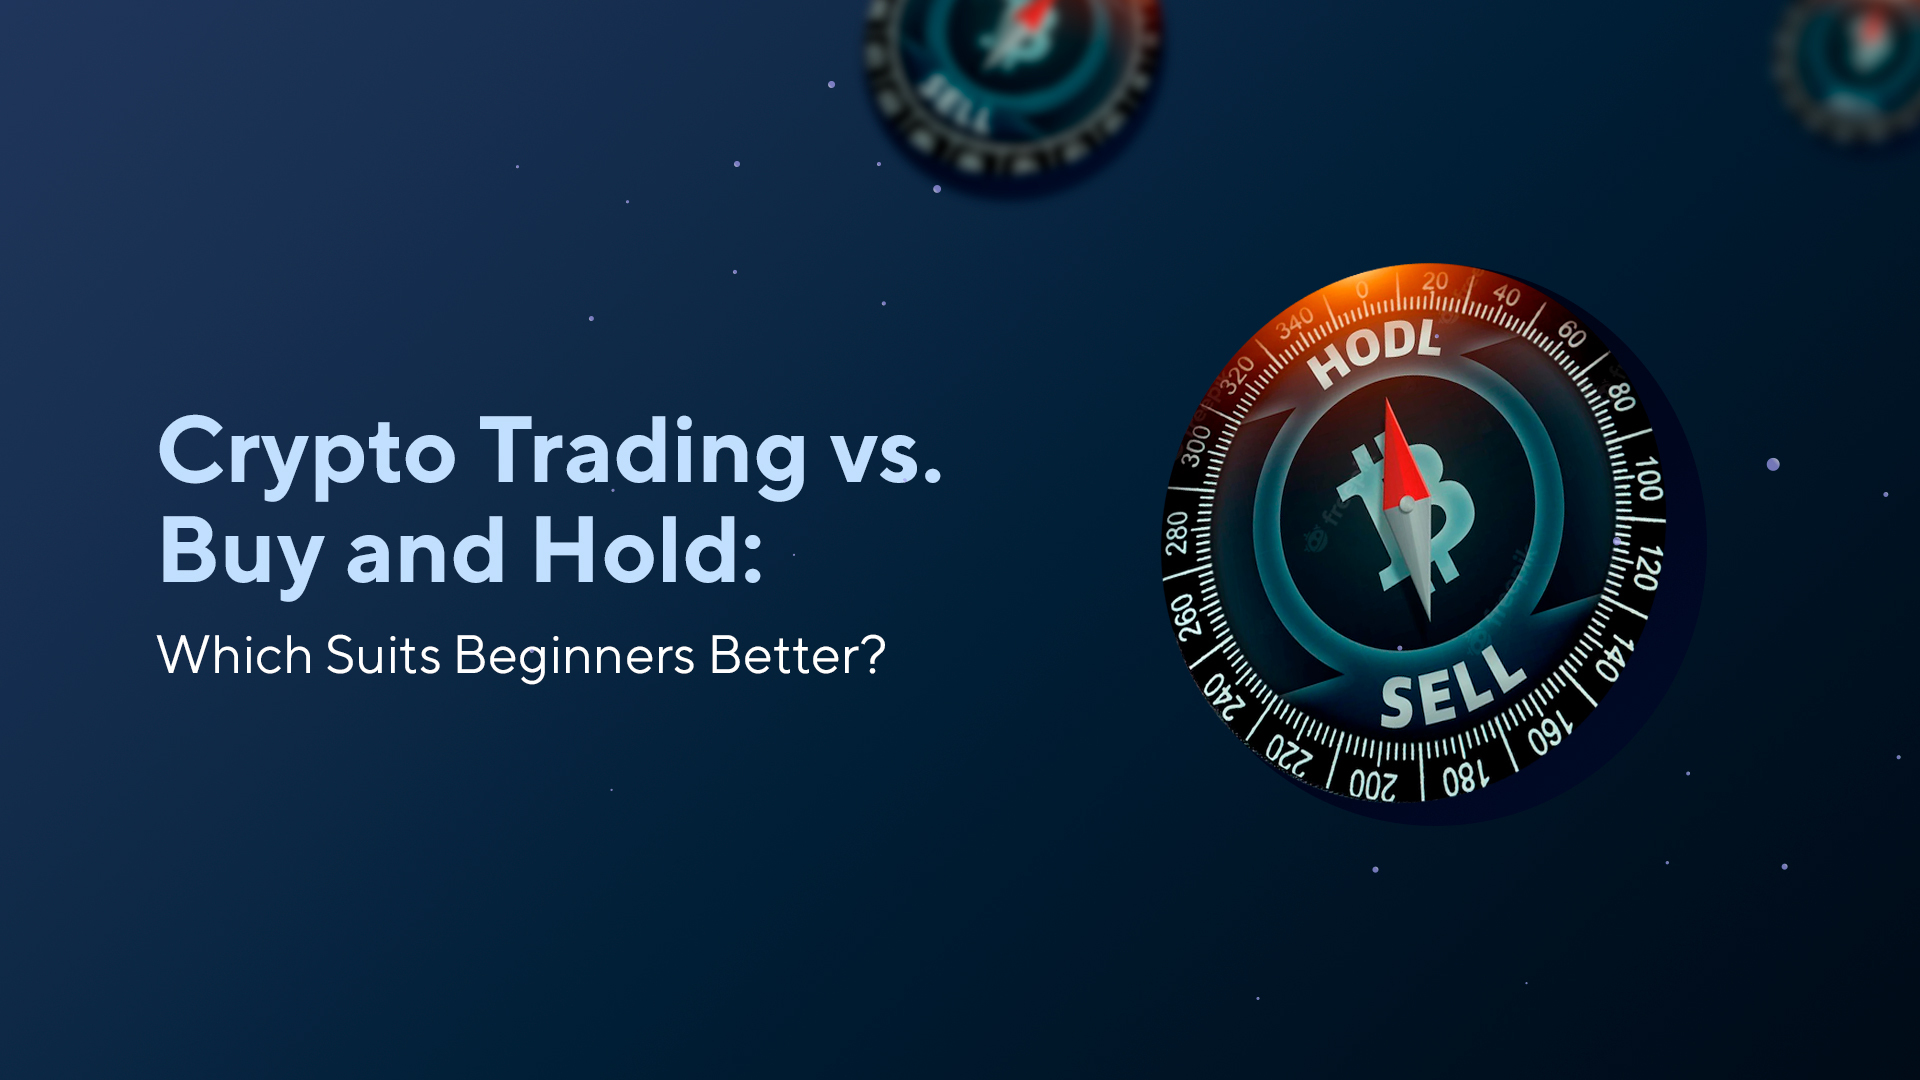 Crypto Trading vs. Buy and Hold: Which Suits Beginners Better?